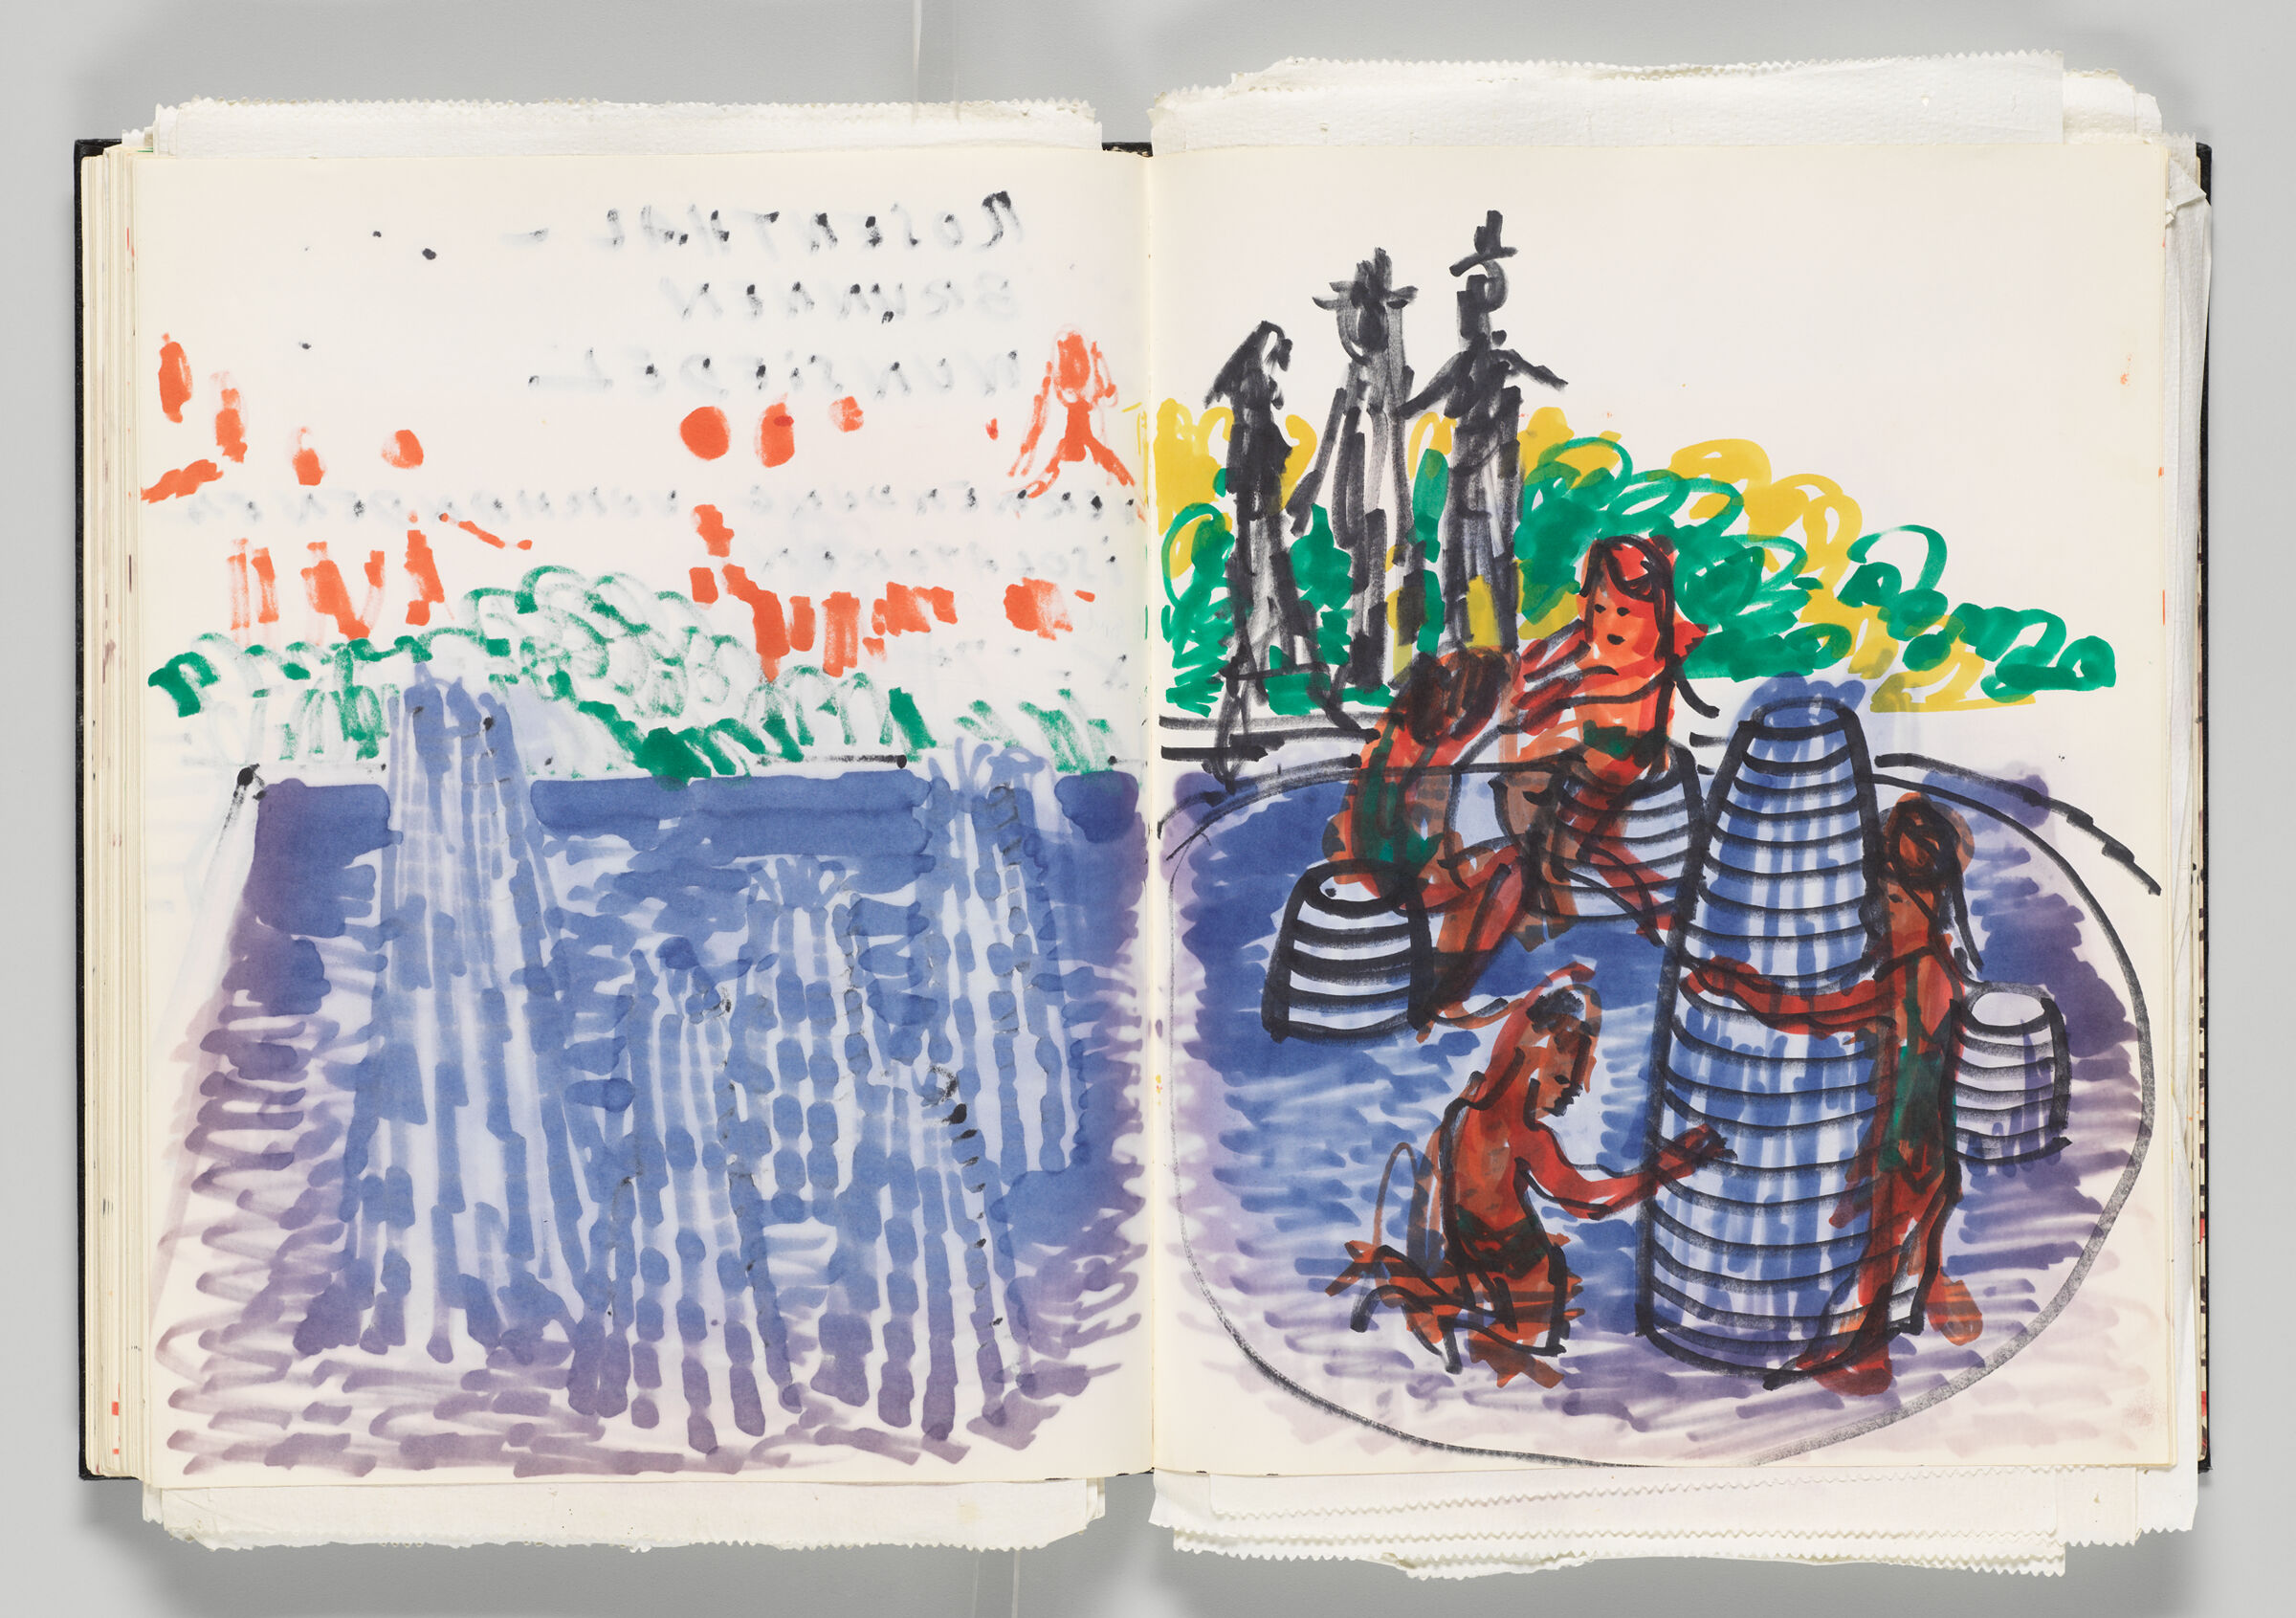 Untitled (Bleed-Through Of Previous Page, Left Page); Untitled (Design For Rosenthal Fountain With Figures, Right Page)